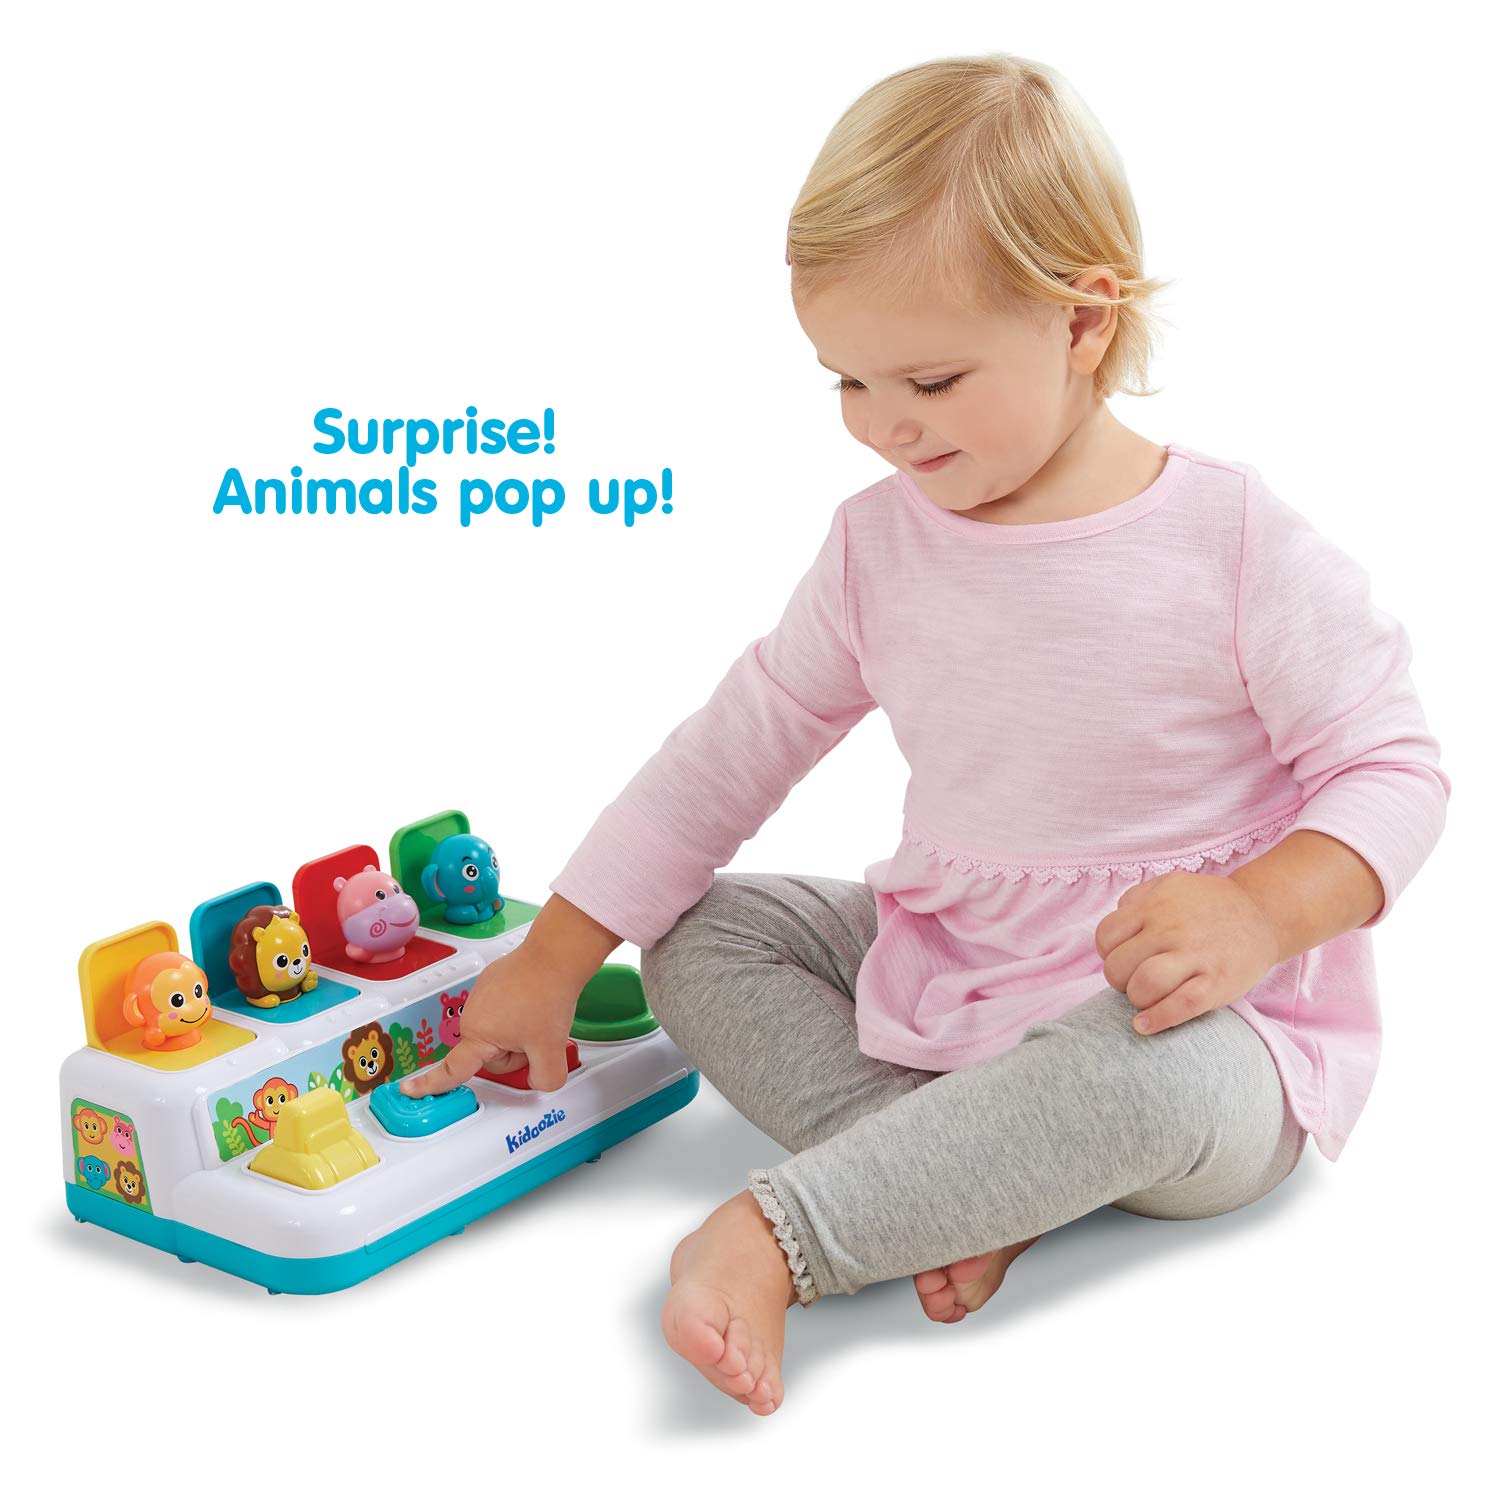 Kidoozie Pop ‘n Play Animal Friends, Pop Up Activity Toy for Learning Colors, Numbers, Animal Names and Sounds; Suitable for Toddlers Ages 12 Months and Older